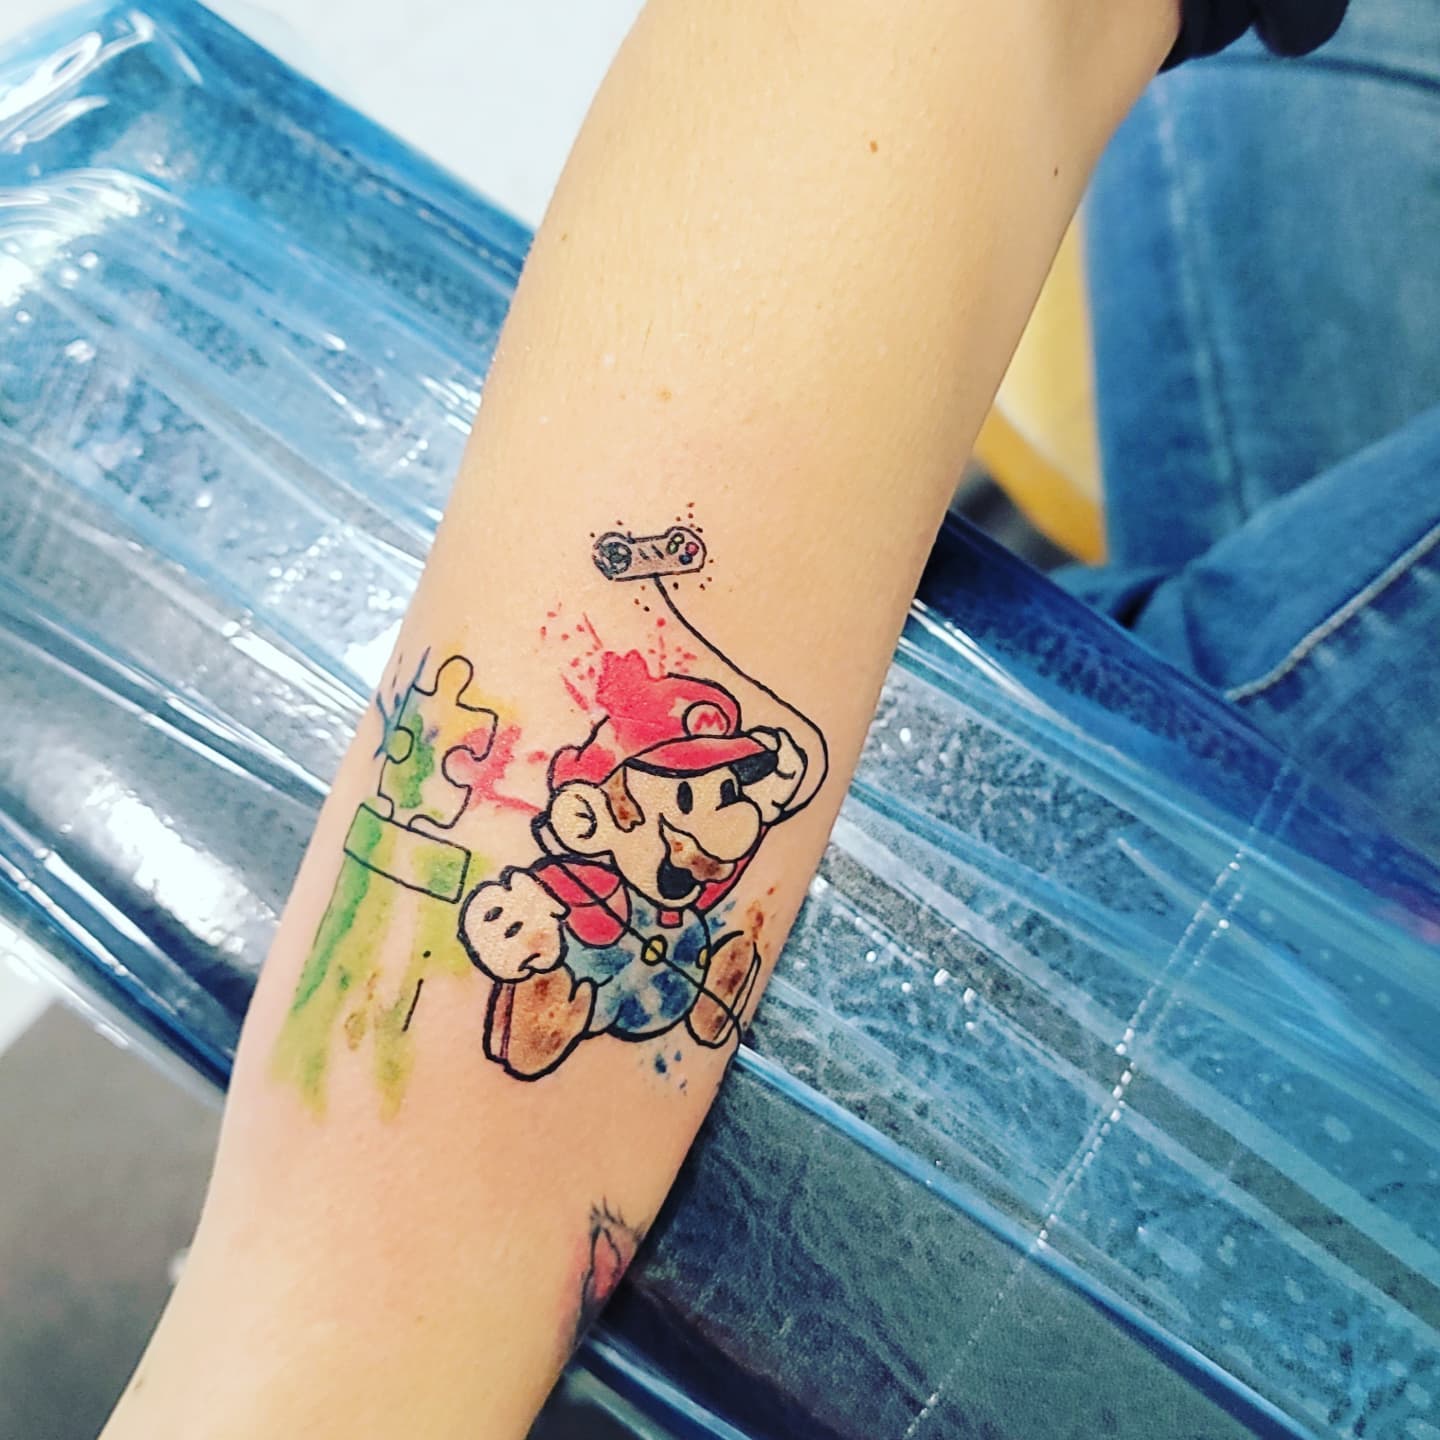 A funny take on this autism tattoo that you can do with your favorite Mario character! If your kids love cartoons or games consider this idea.